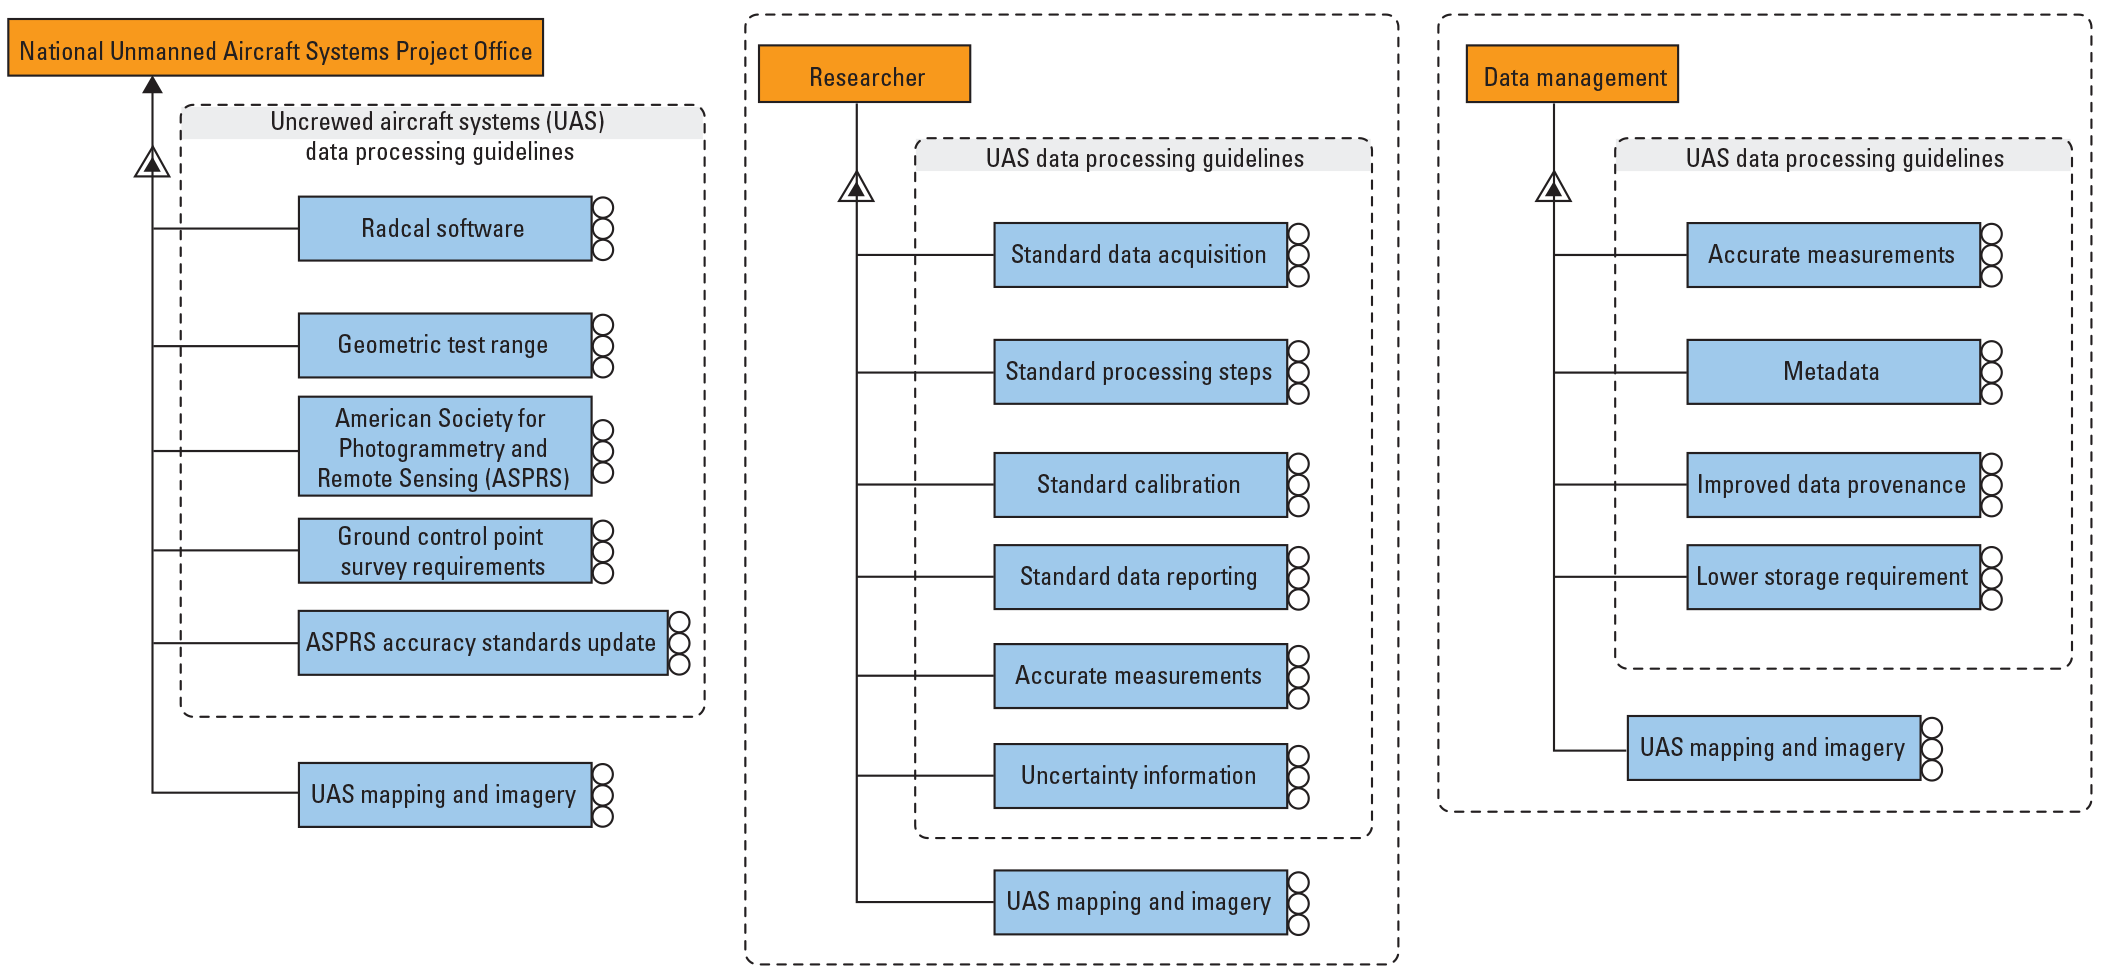 Diagram of UAS data processing guidelines for the National UAS Project Office, researchers,
                     and data management.